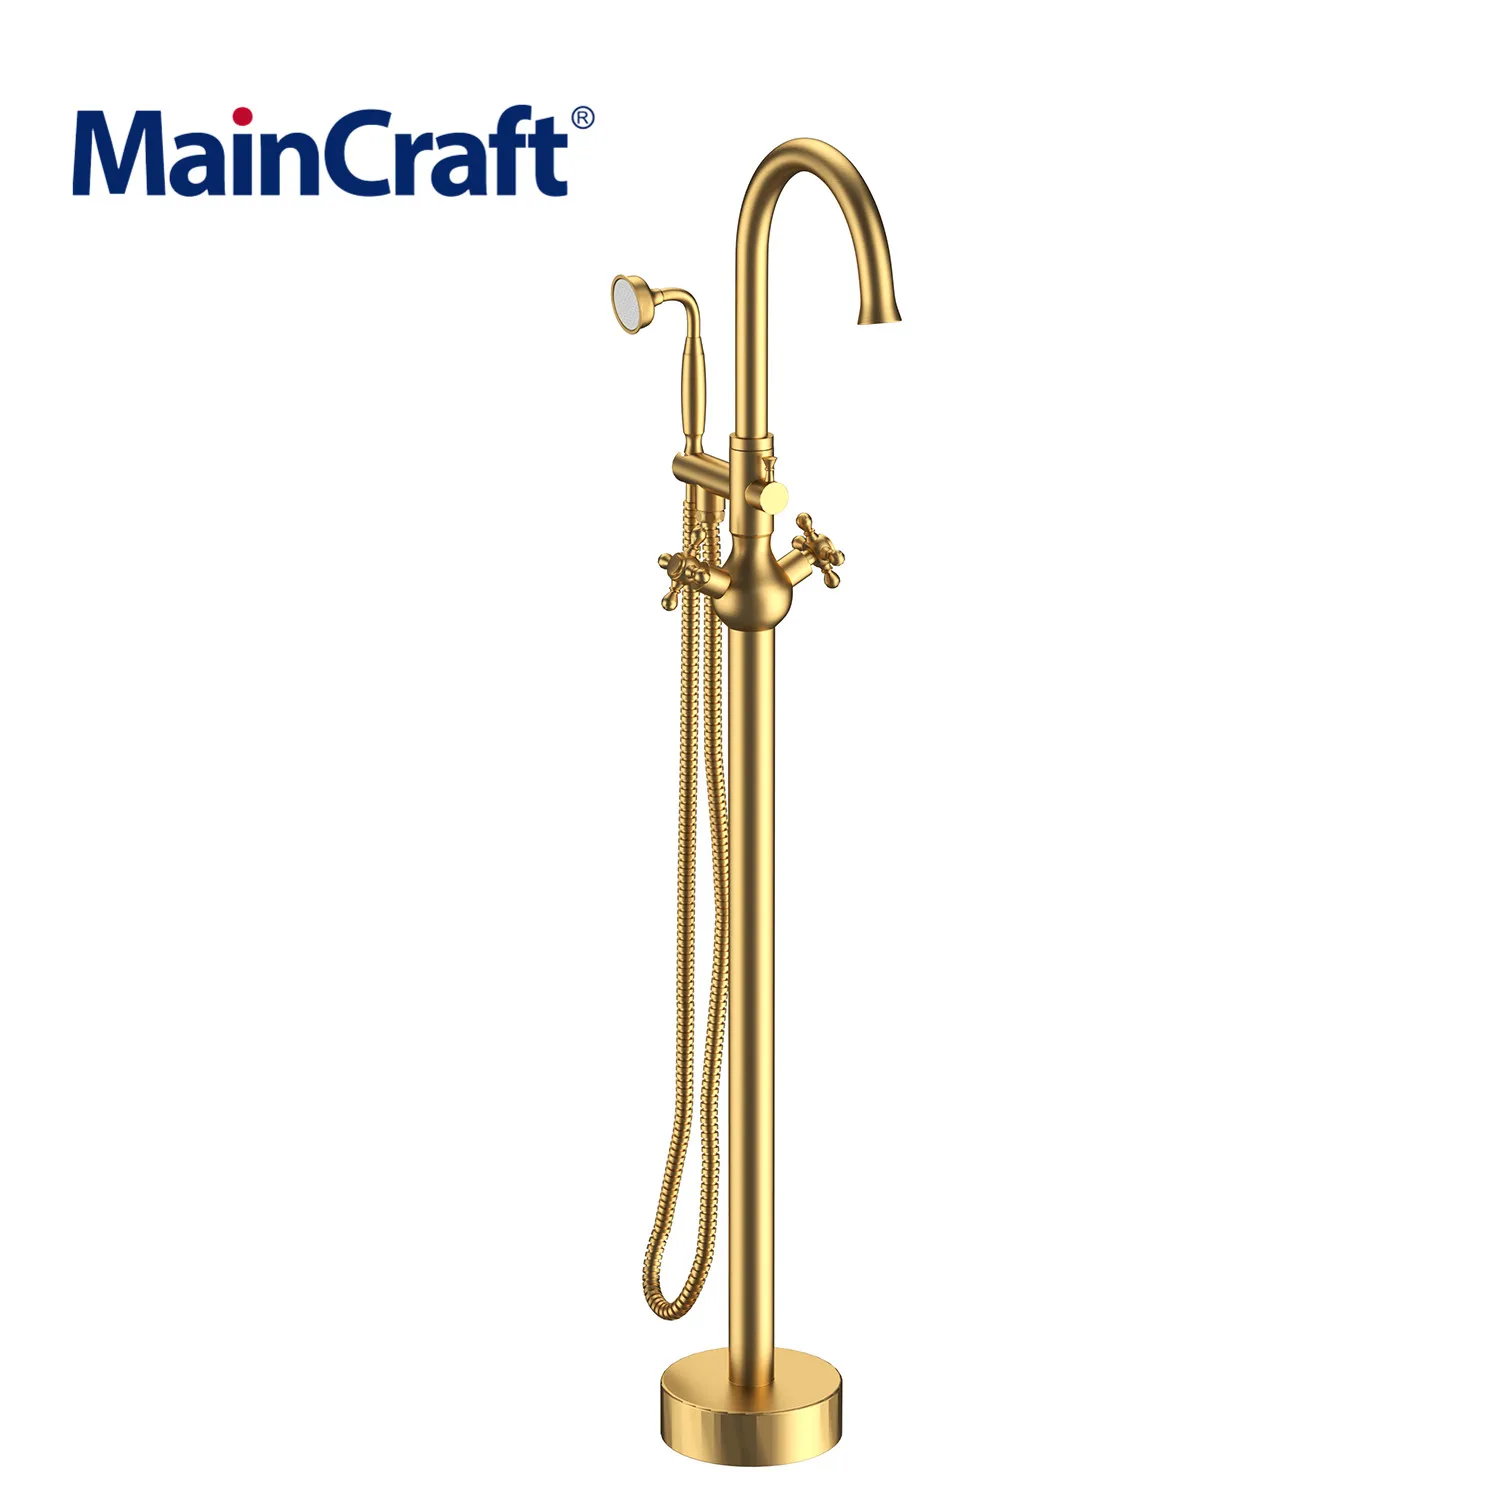 

Chrome Bathroom Faucet Floor Mounted Clawfoot Tub Faucet Free Standing Mixer Tap with Handshower Single Lever Bathtub Faucet